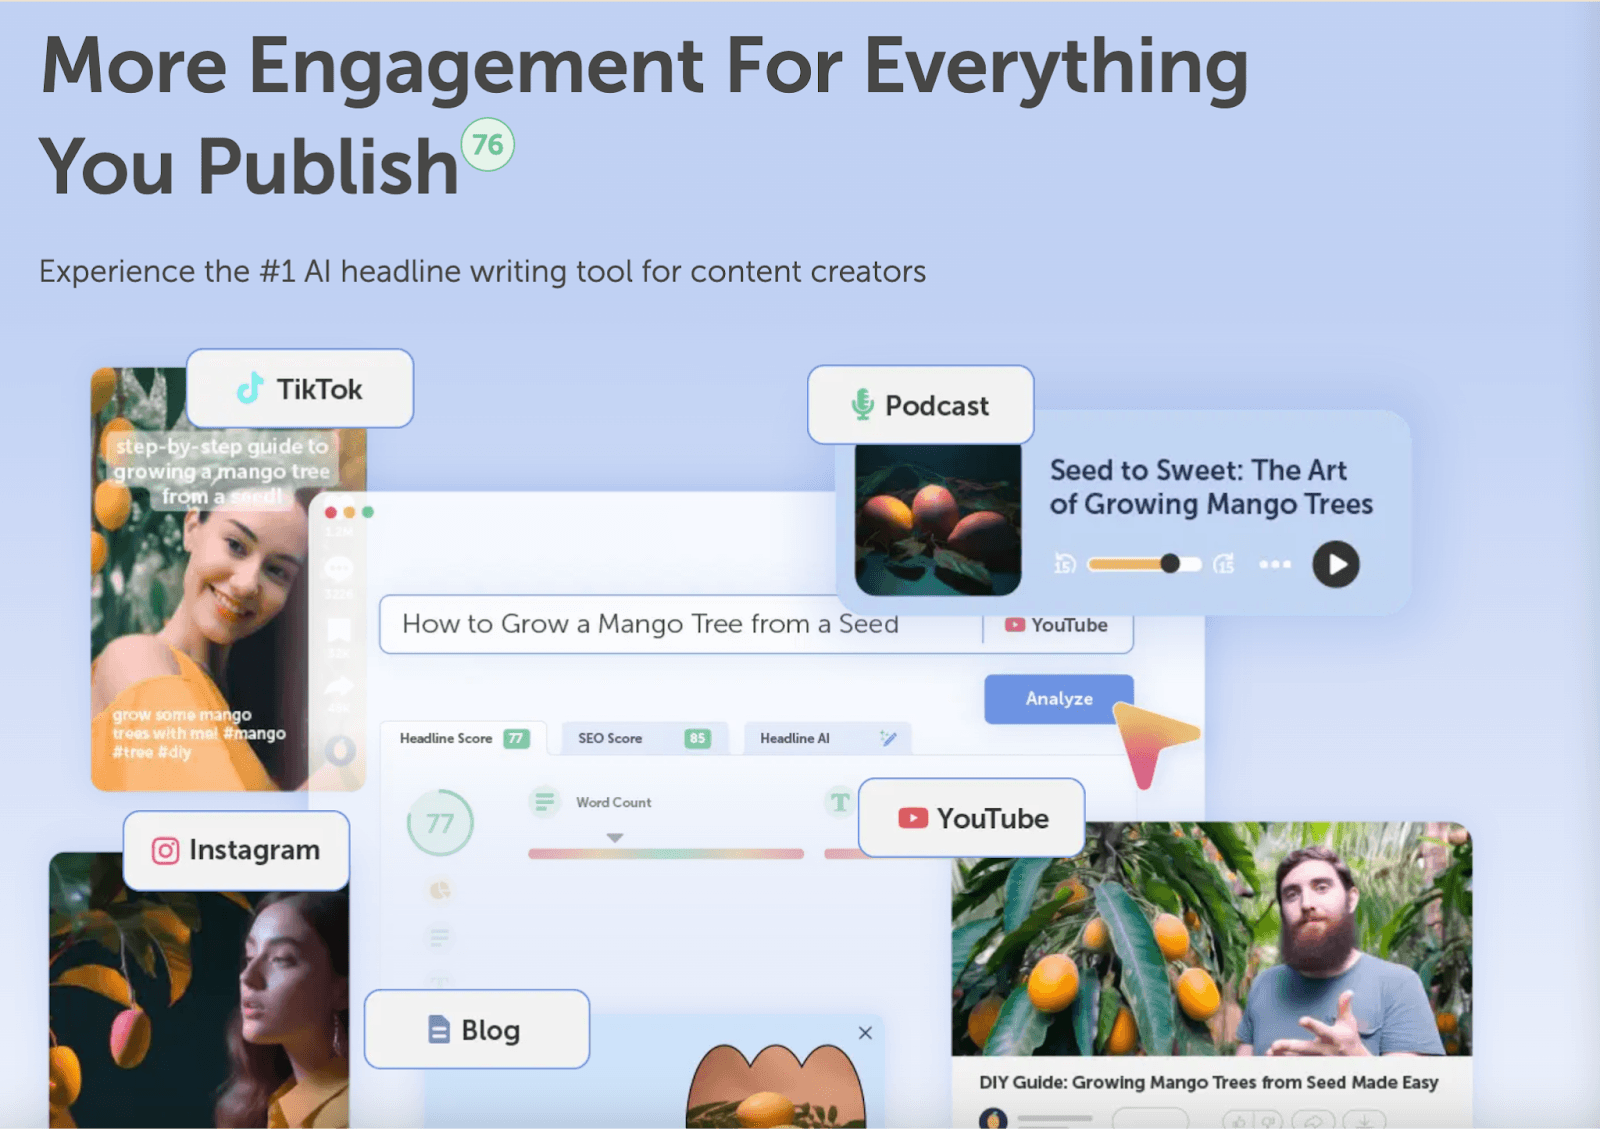 Headline Studio's website page "More Engagement For Everything You Publish"